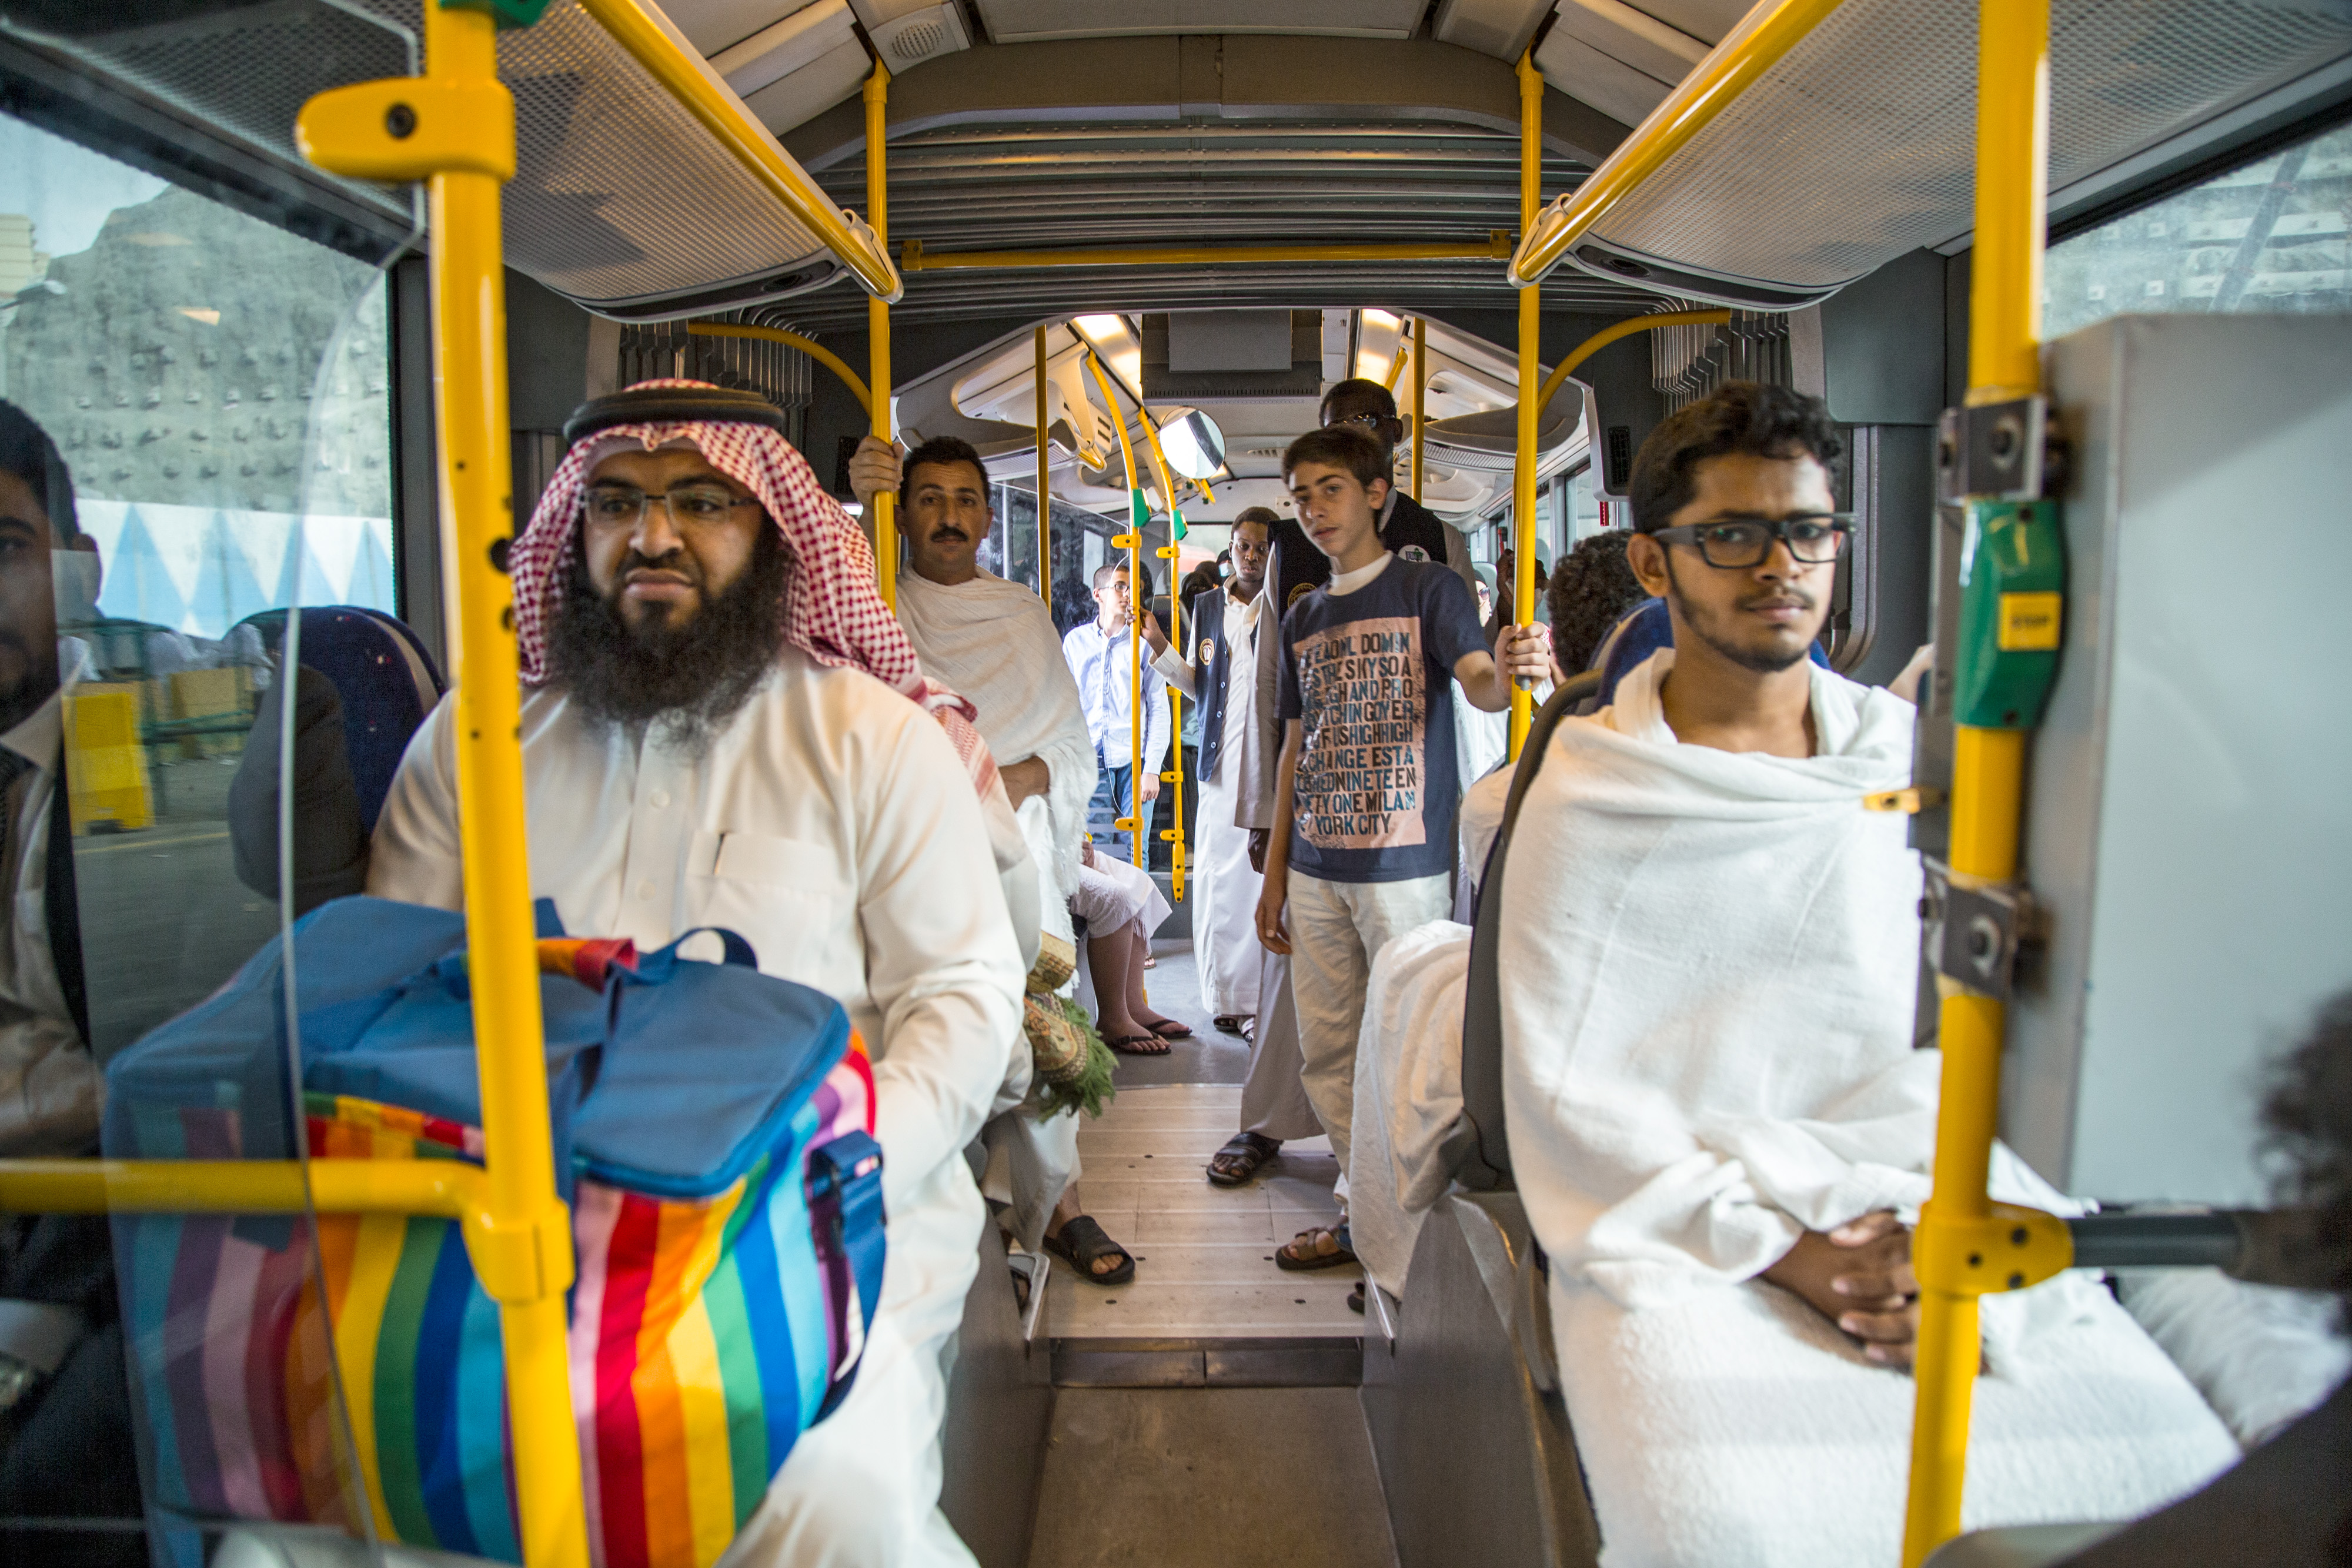 Through his work, Ahmed Mater explores the lives of Mecca’s inhabitants as seen here in Public Transit, 2015.